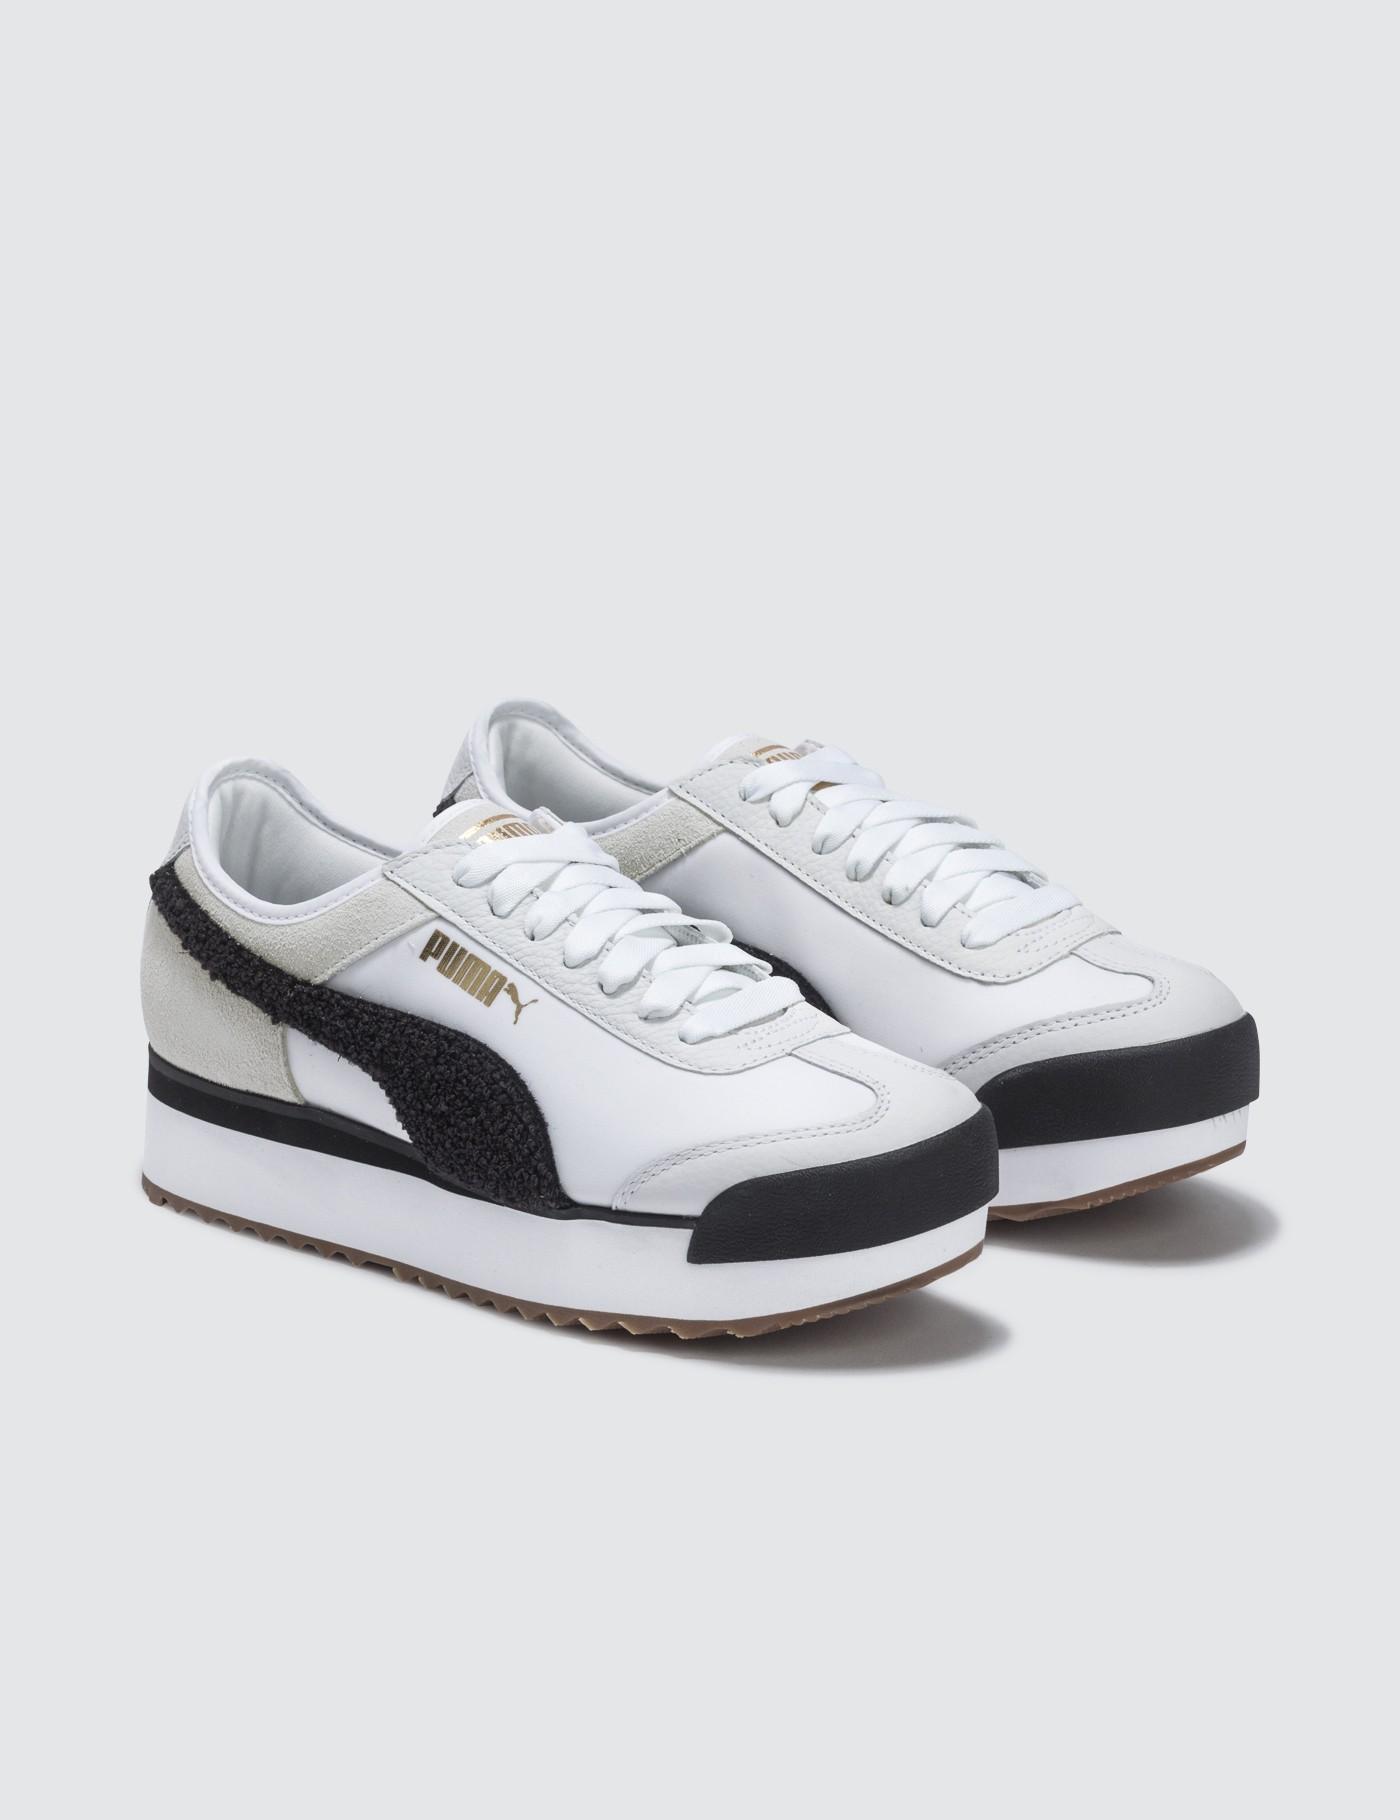 PUMA Leather Women's Roma Amor Heritage in White - Lyst